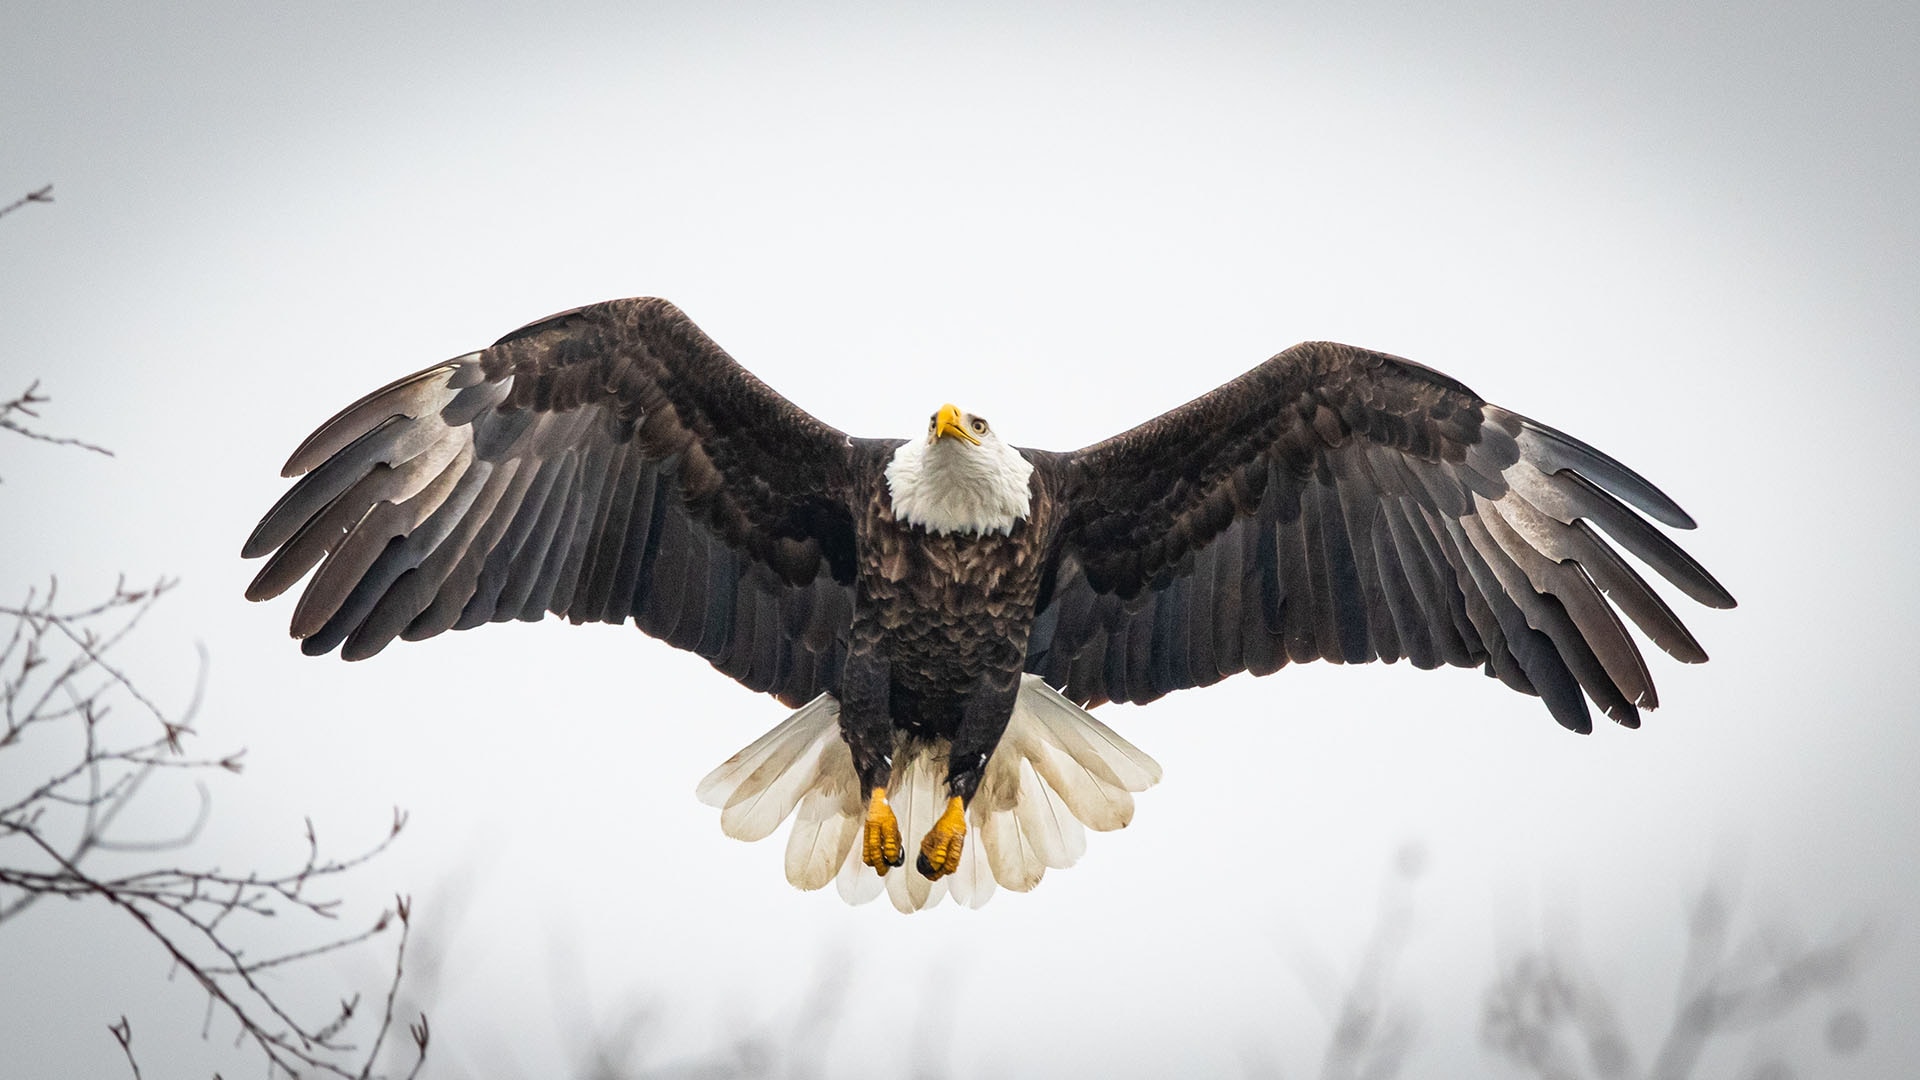 Best Places to See Bald Eagles in the Midwest